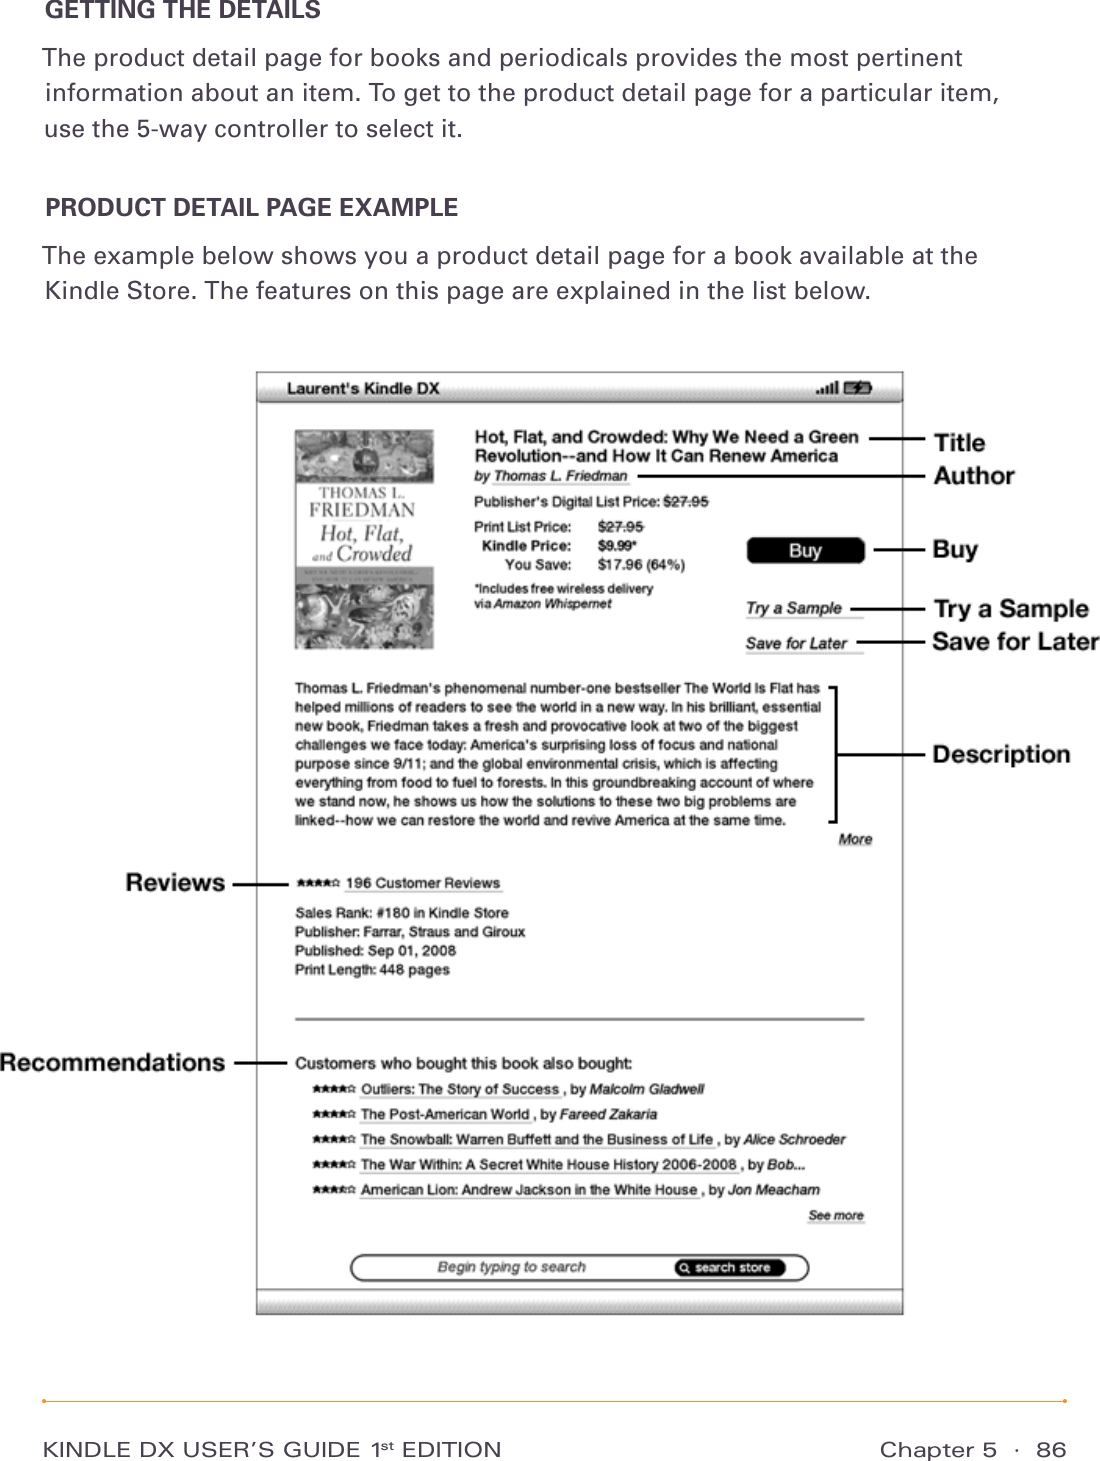 Chapter 5  ·  86KINDLE DX USER’S GUIDE 1st EDITIONGETTING THE DETAILSThe product detail page for books and periodicals provides the most pertinent information about an item. To get to the product detail page for a particular item,  use the 5-way controller to select it.PRODUCT DETAIL PAGE EXAMPLEThe example below shows you a product detail page for a book available at the  Kindle Store. The features on this page are explained in the list below.